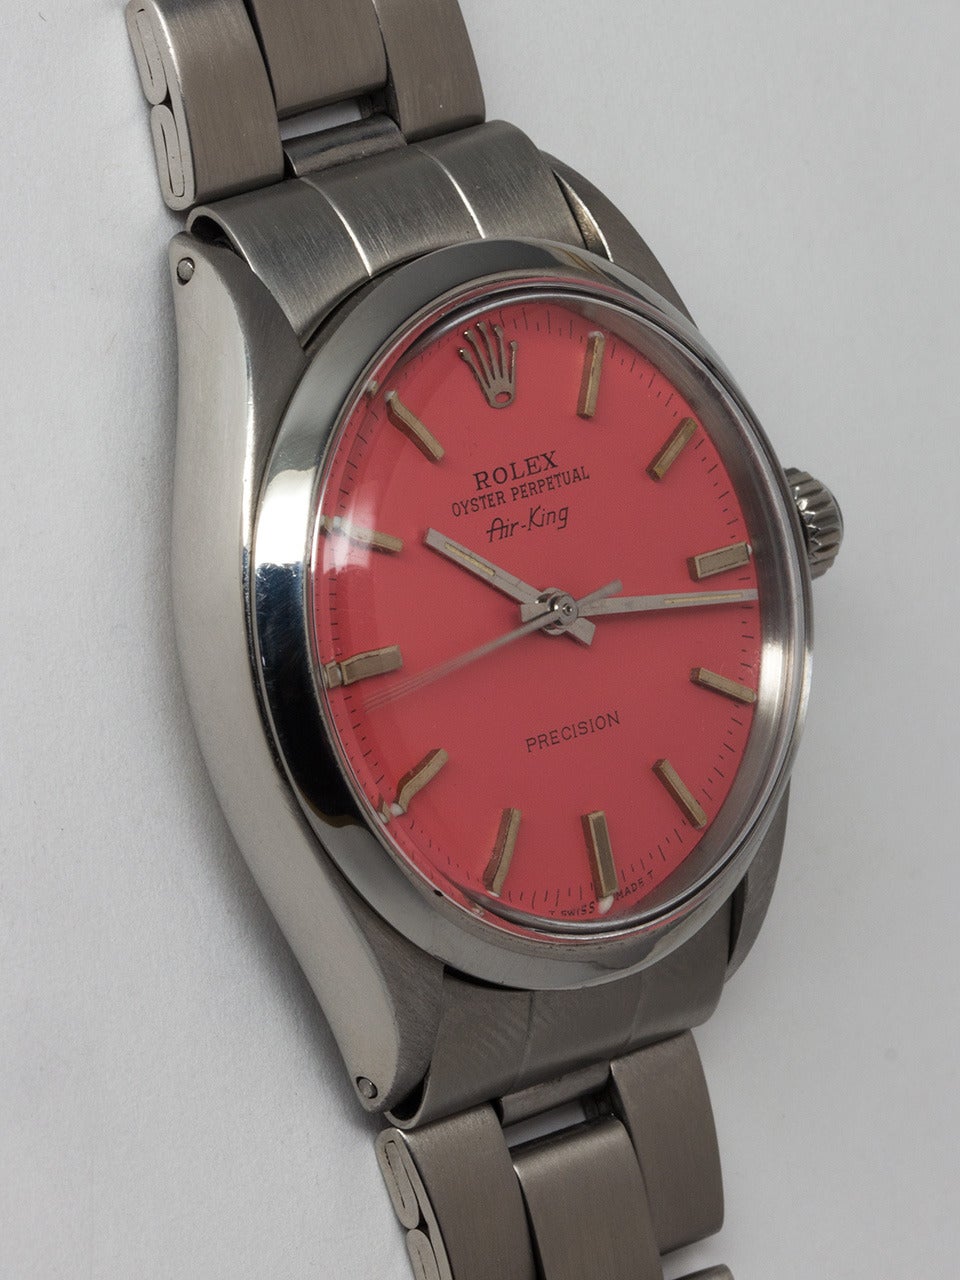 Rolex Stainless Steel Oyster Perpetual Airking Wristwatch ref 1002 serial number 2.1 million circa 1969. 34mm diameter case with smooth bezel and acrylic crystal. With beautiful custom colored Watermelon dial with applied silver indexes and silver